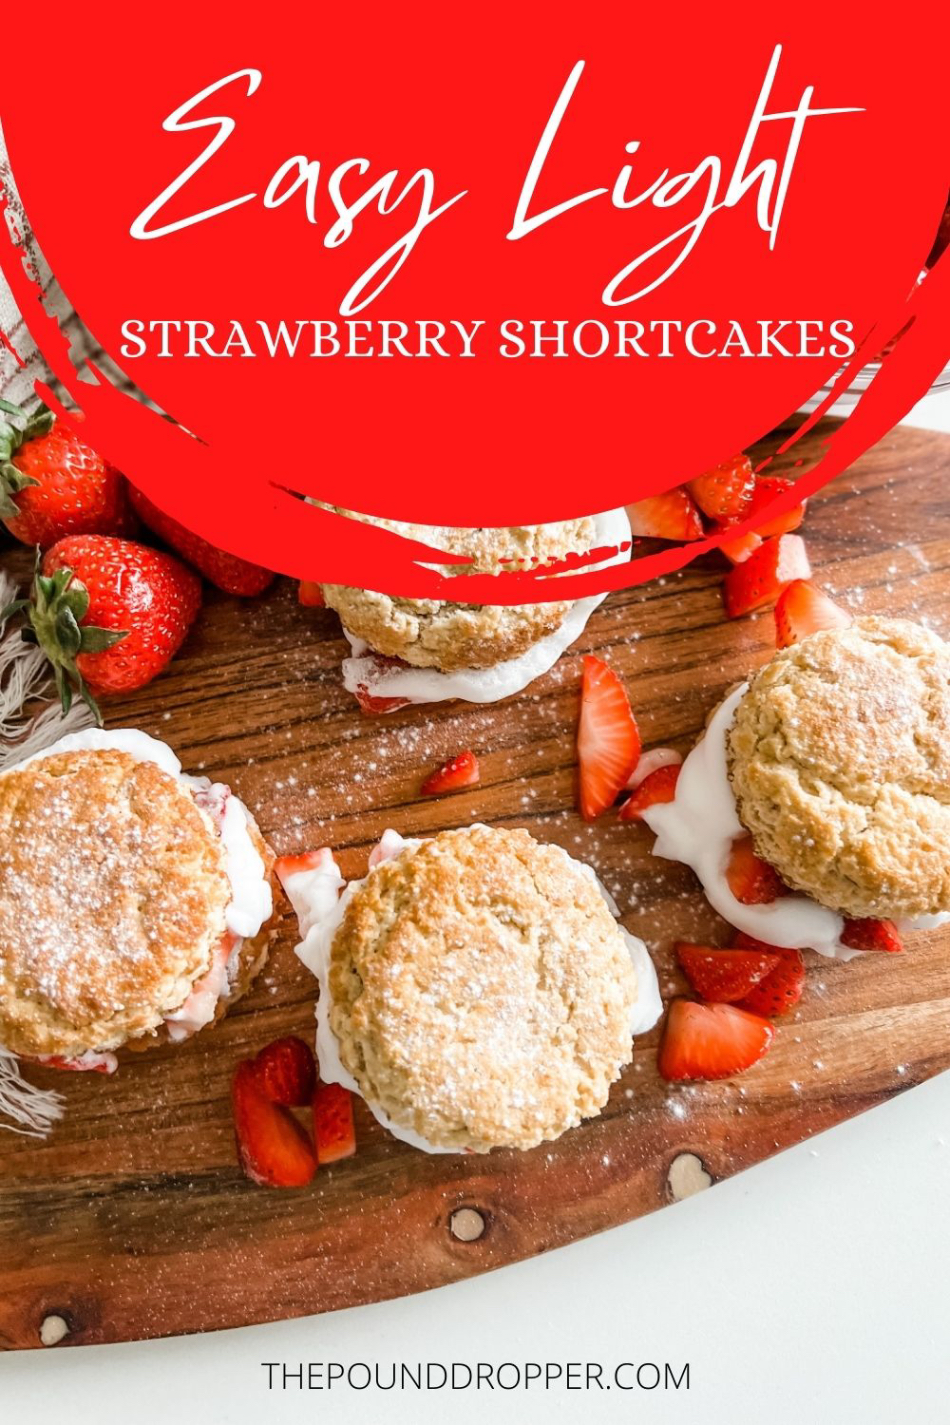 These Easy Light Strawberry Shortcakes are a MUST have during the spring and summer months! Fluffy protein packed biscuits layered with fresh juicy strawberries and then topped with tasty sugar free cool whip! via @pounddropper